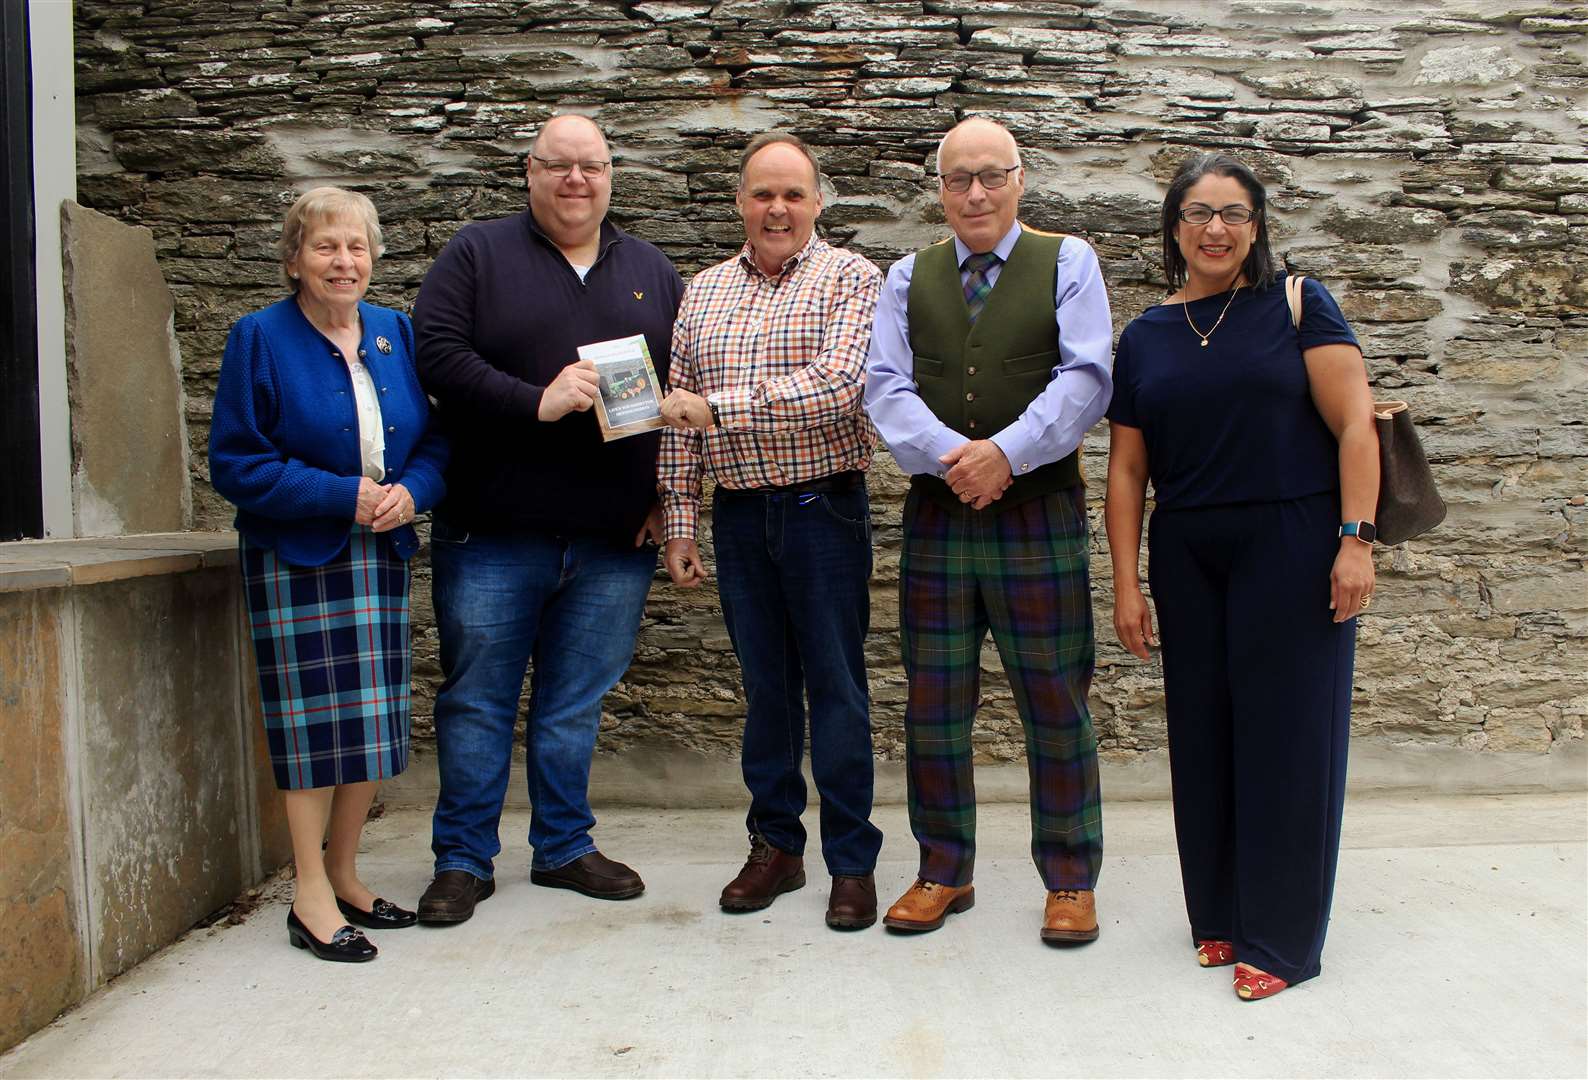 Donald MacDonald (centre) with (from left) Susan Somerset, Calum Adams, Peter Somerset and Elizangela Robertson at the book launch in Thurso at the weekend. Picture: Alan Hendry